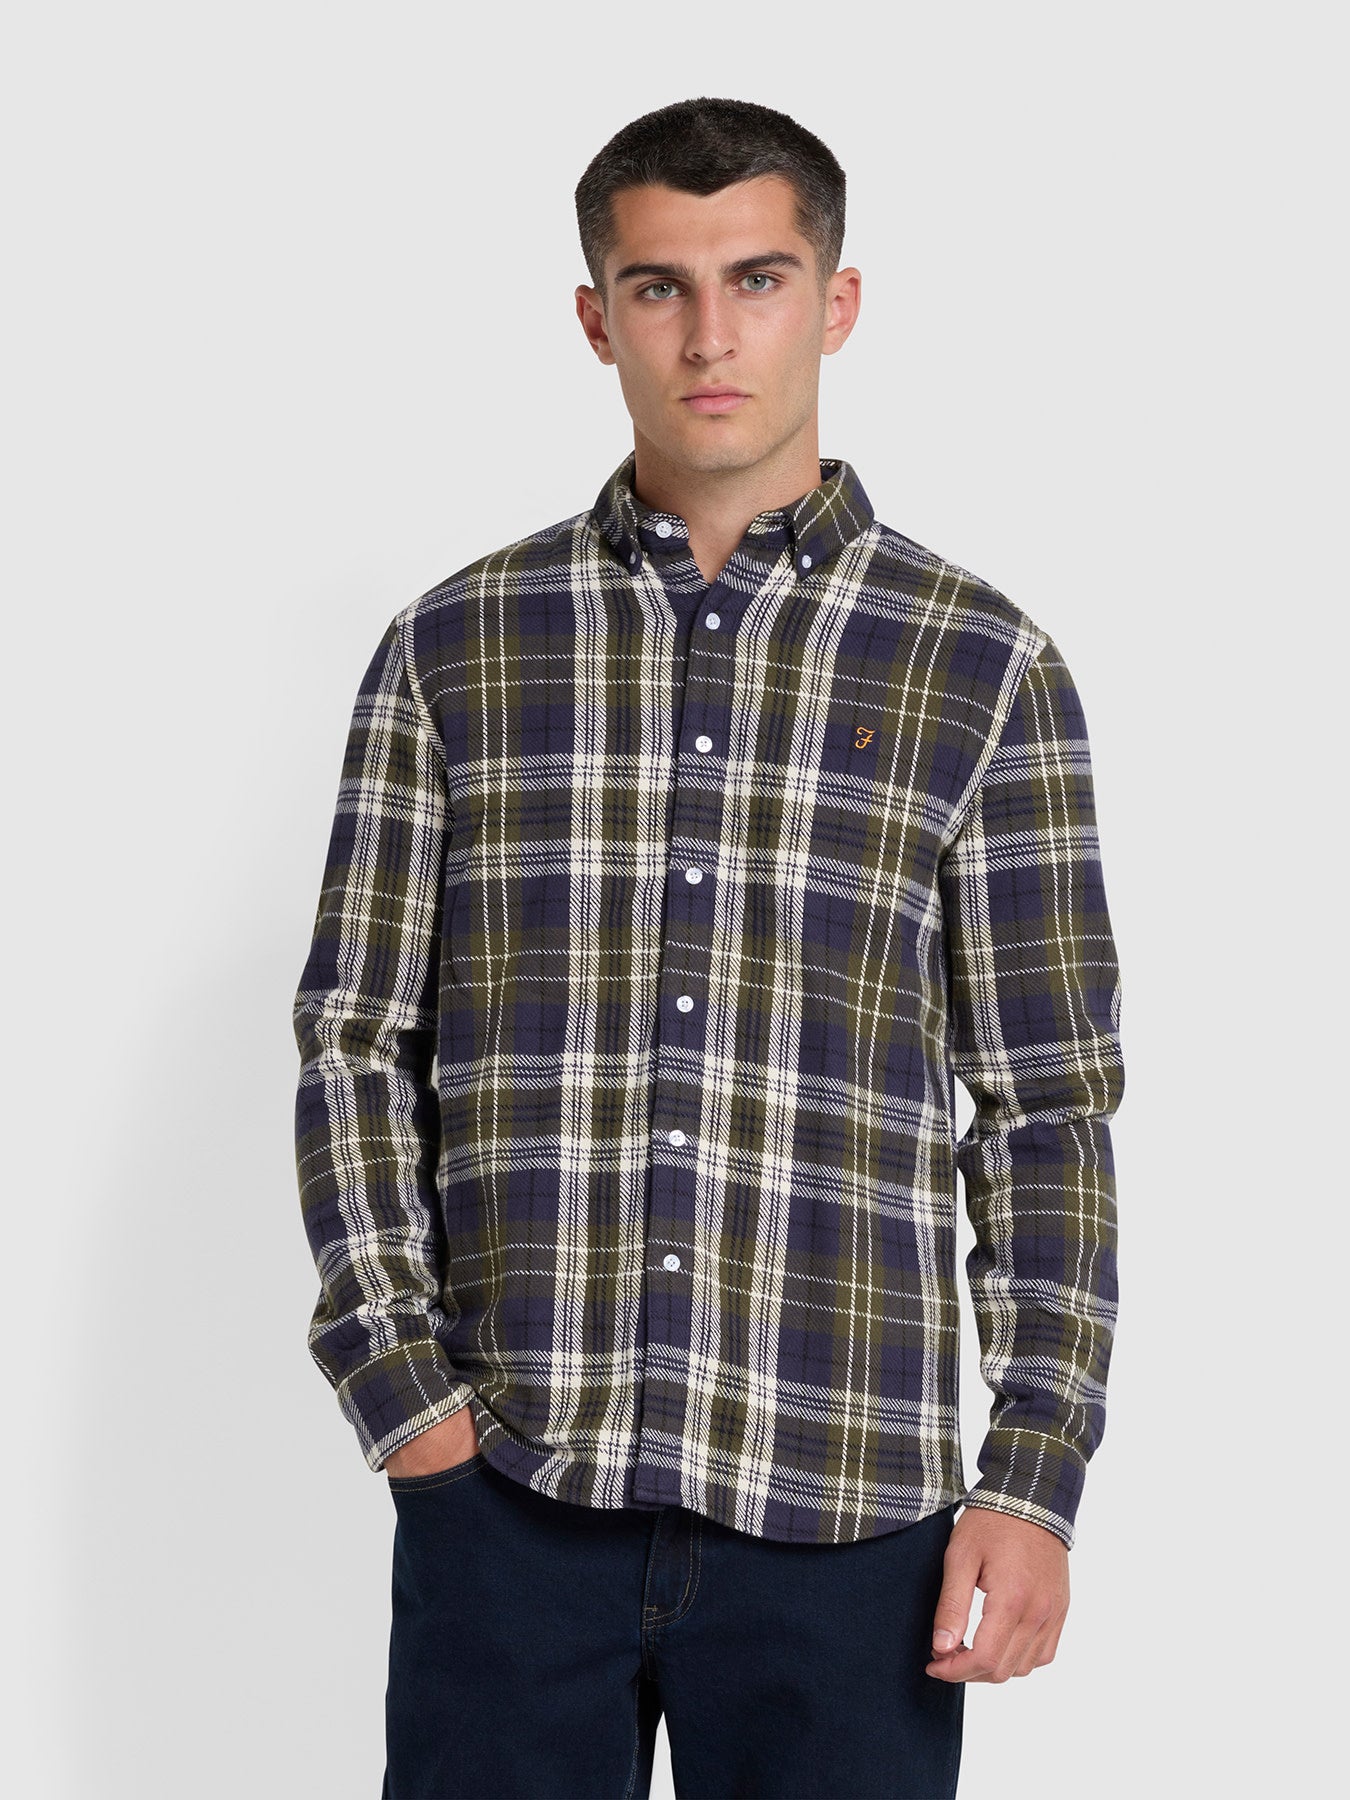 View Greenwood Slim Fit Check Organic Cotton Long Sleeve Shirt In Olive Gre information